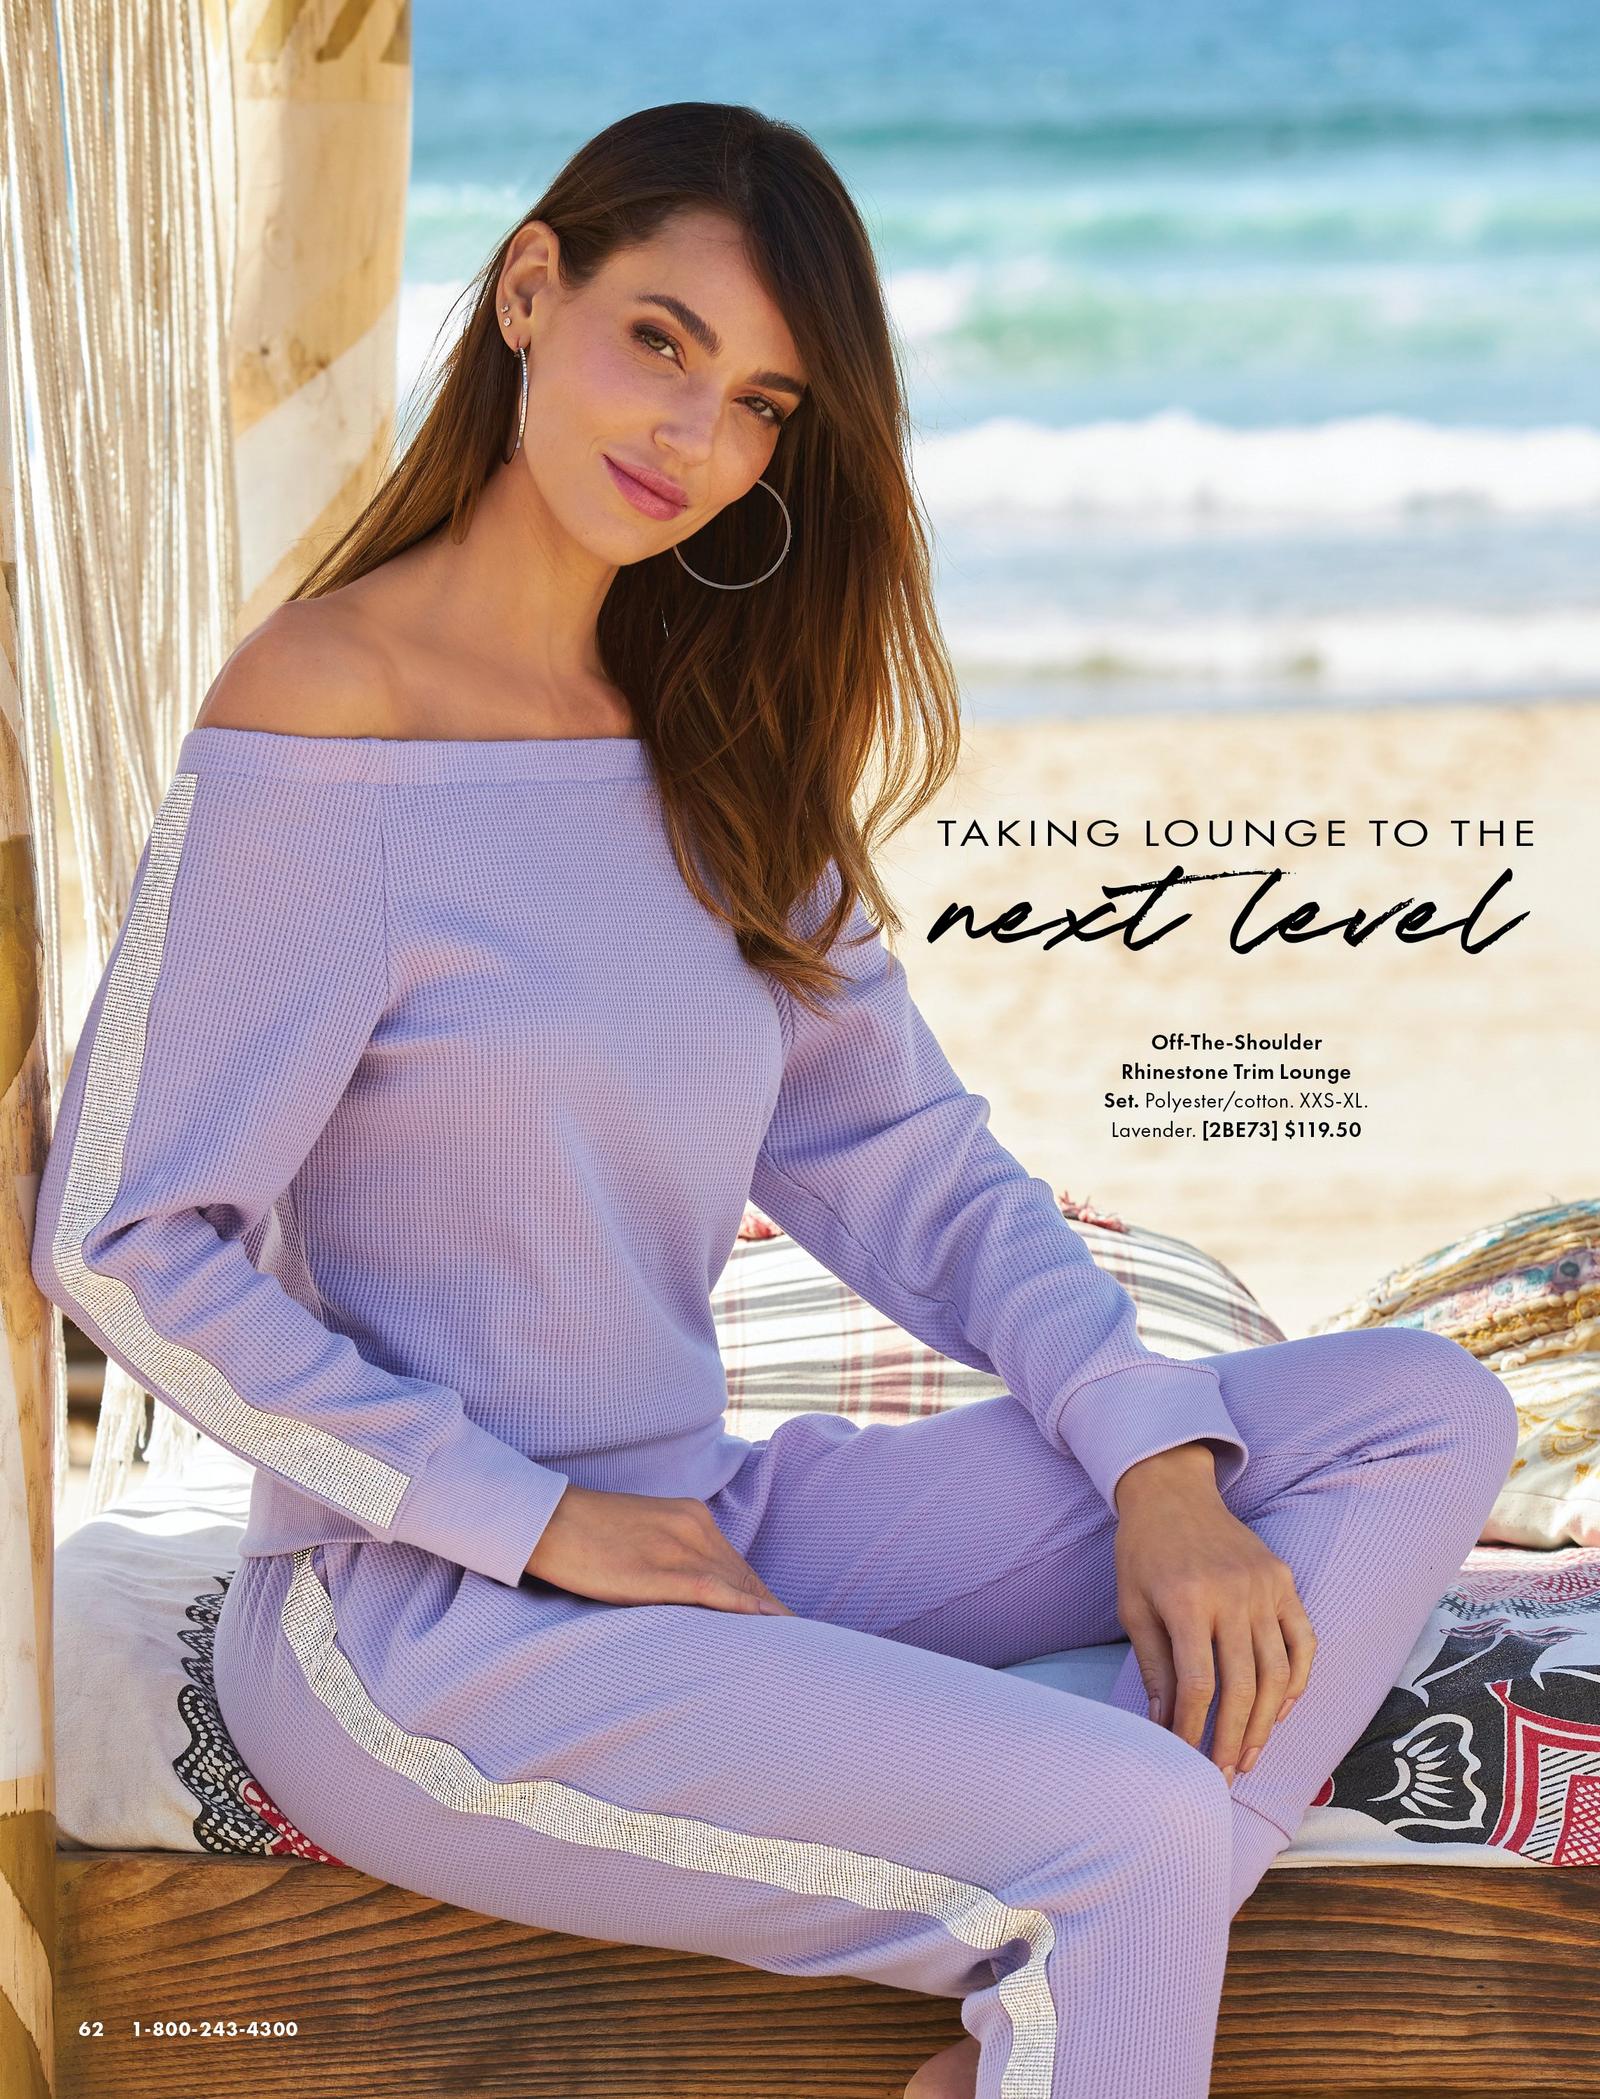 model wearing a lavender off-the-shoulder rhinestone embellished top and matching lounge pants.